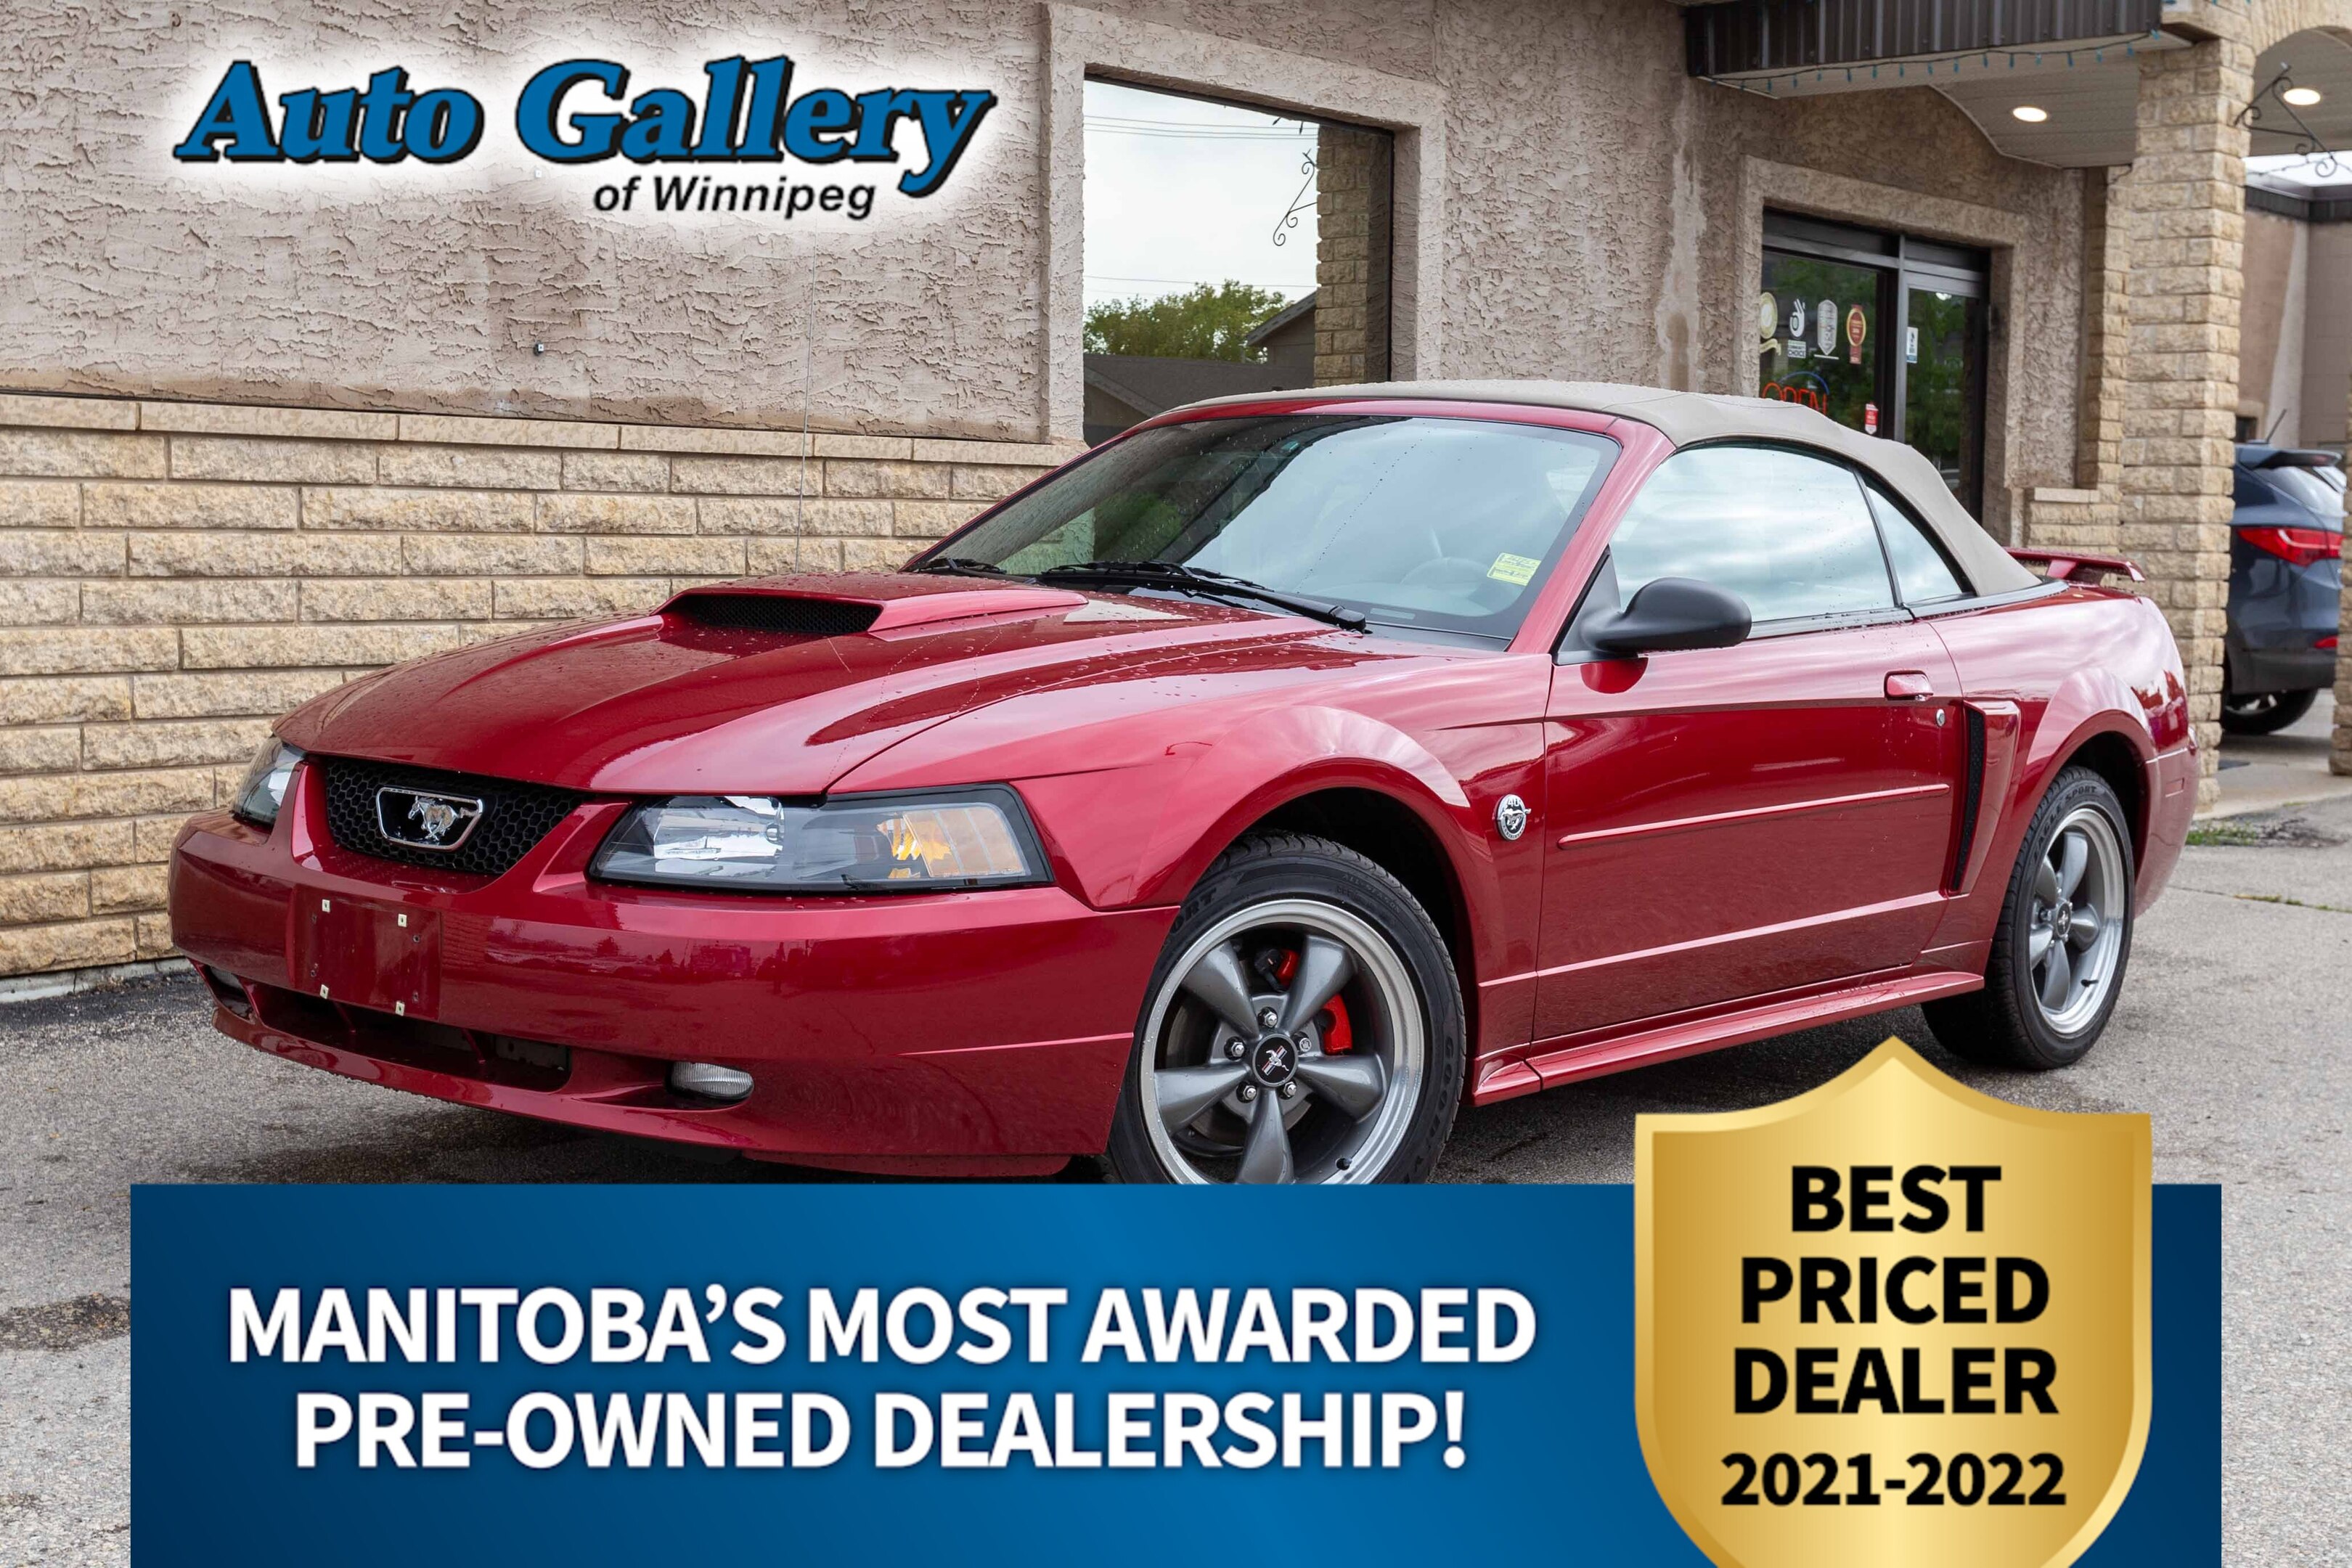 2004 Ford Mustang 2dr Convertible GT, Leather, RWD, 40th